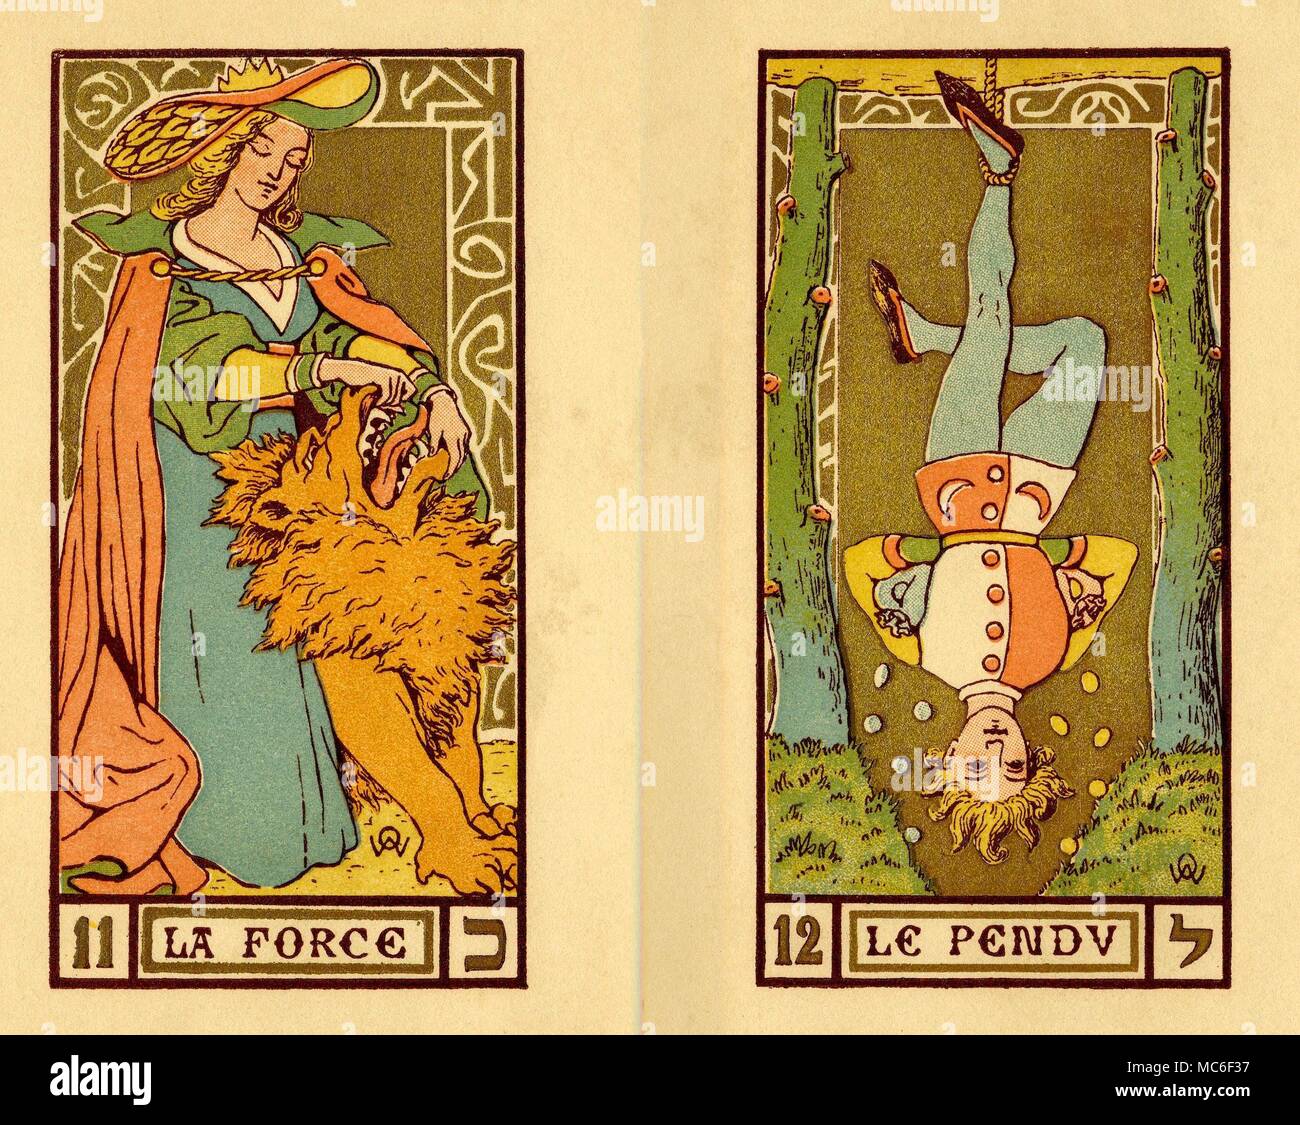 OSWALD WIRTH DECK OF 1926 Undoubtedly the most beautiful Tarot deck of the 20th century, these Tarot cards were designed originally in 1889 by the symbolist, Oswald Wirth, and published in a slightly 